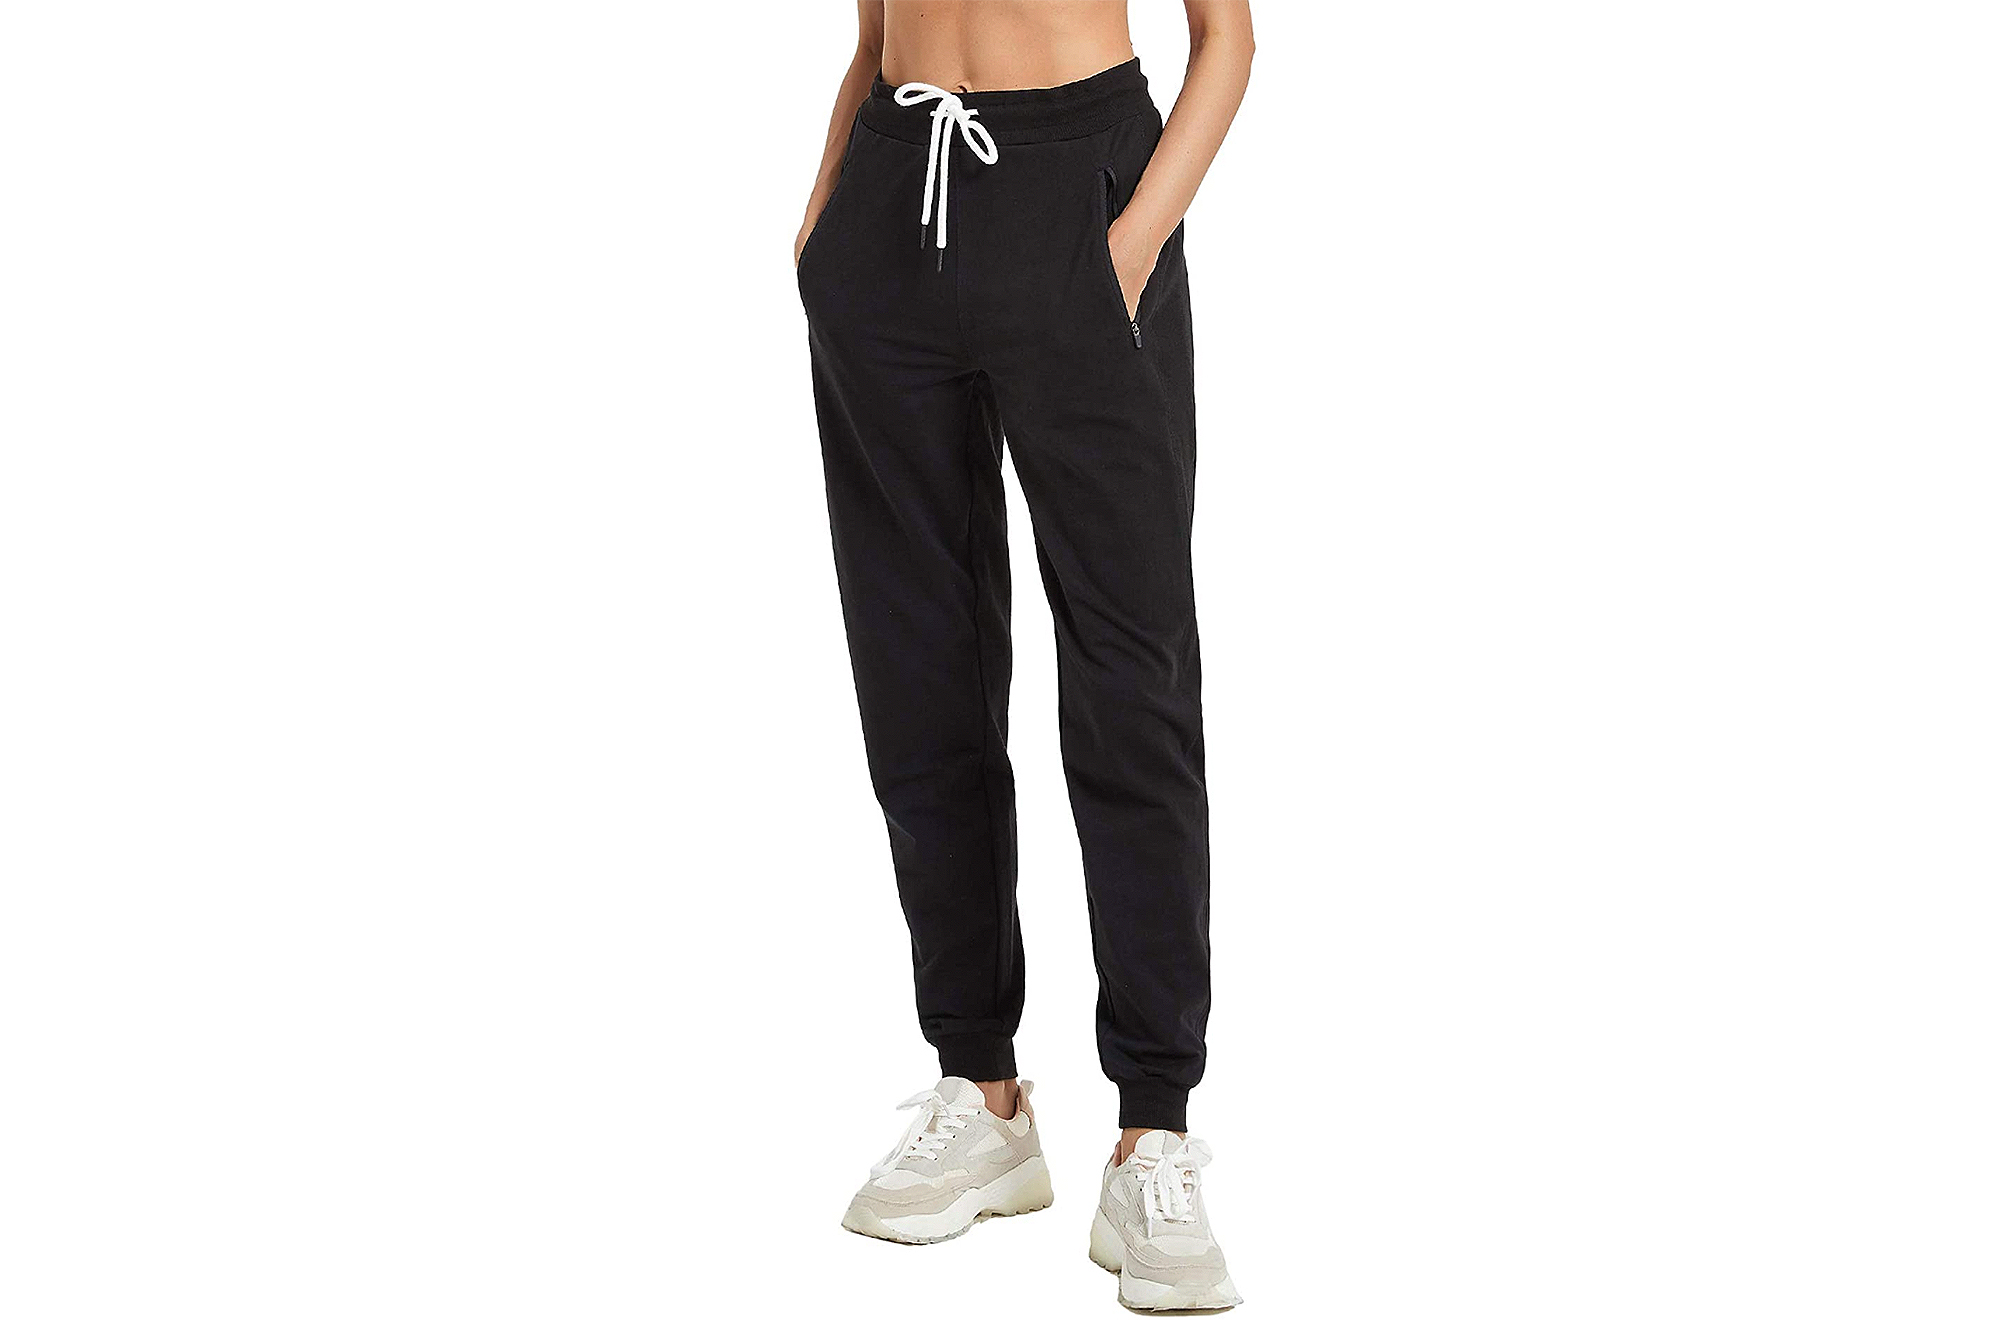 Puli Simple Joggers Are a Staple in Every Loungewear Wardrobe